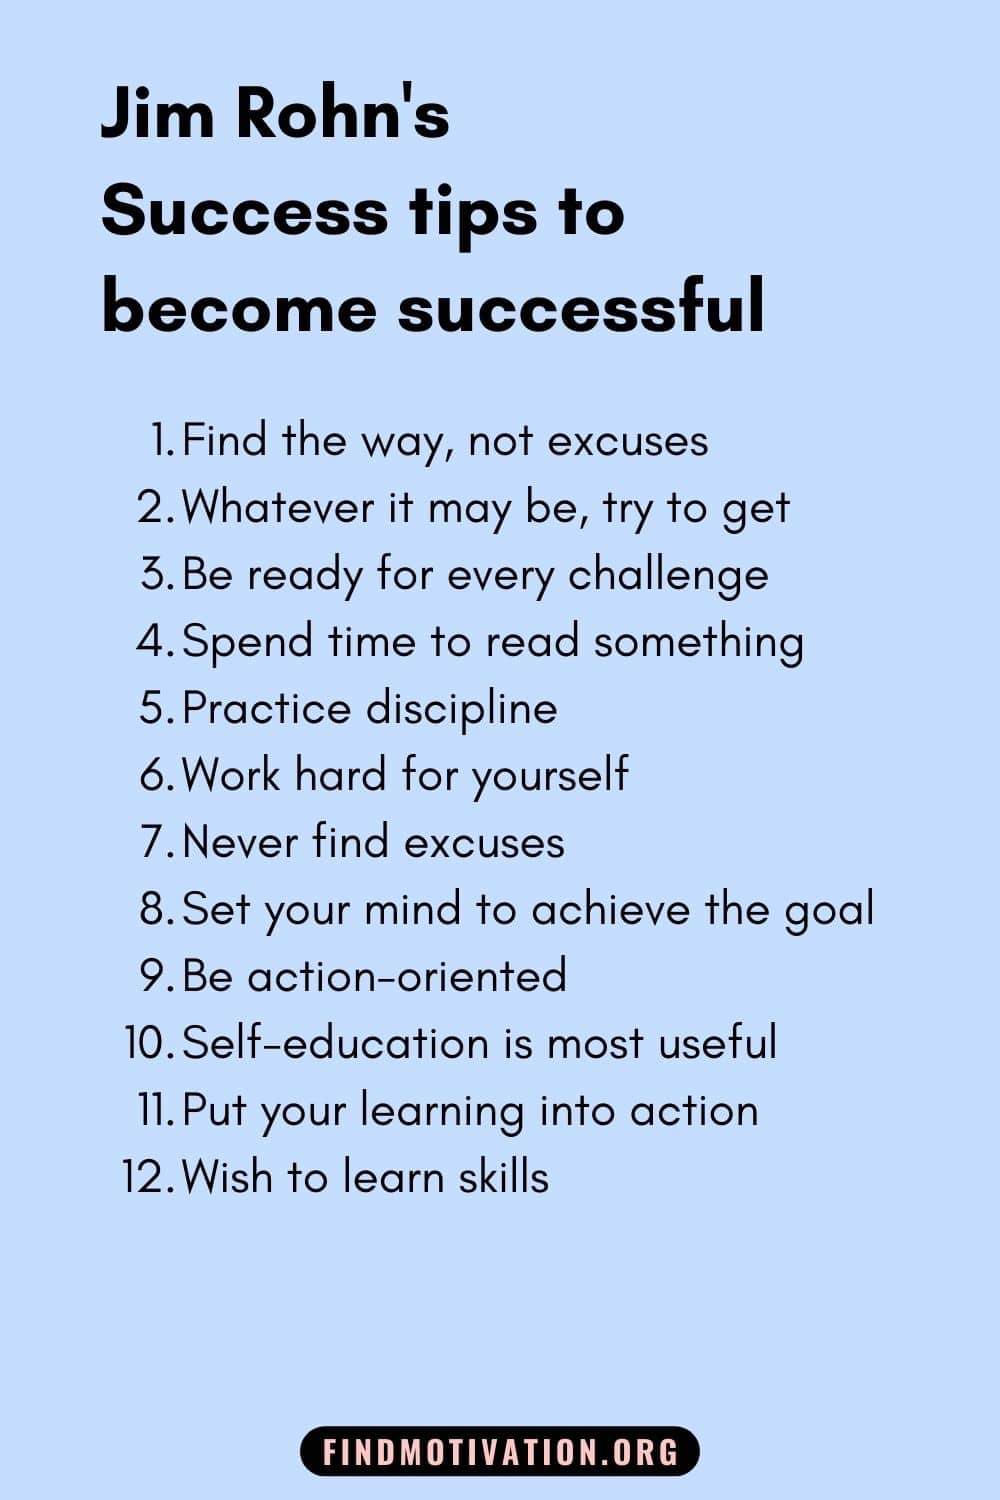 Jim Rohn's Quotes about success to become successful